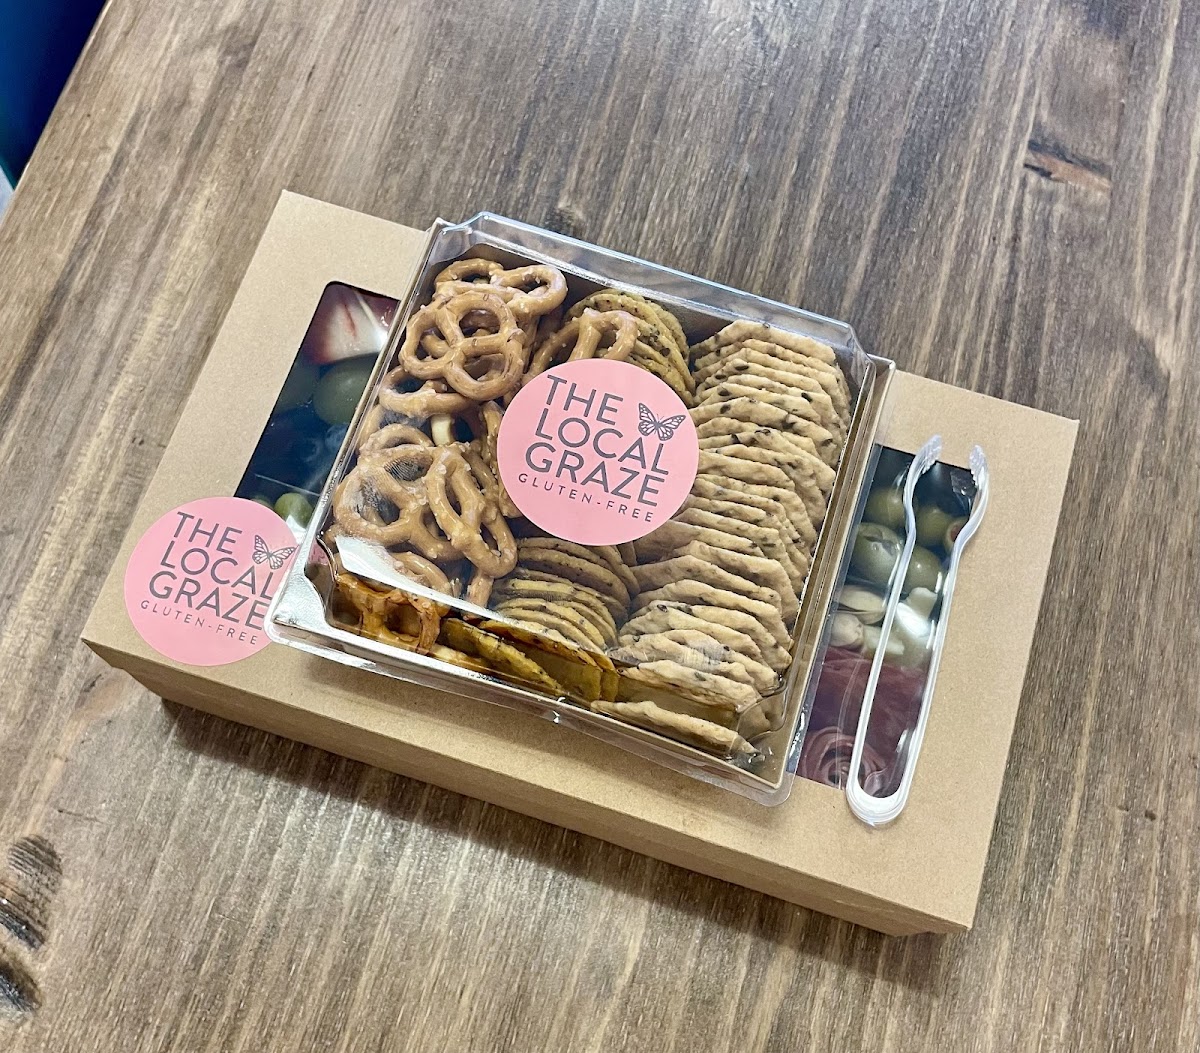 “Up to 4” Charcuterie Graze Box - separate cracker box included